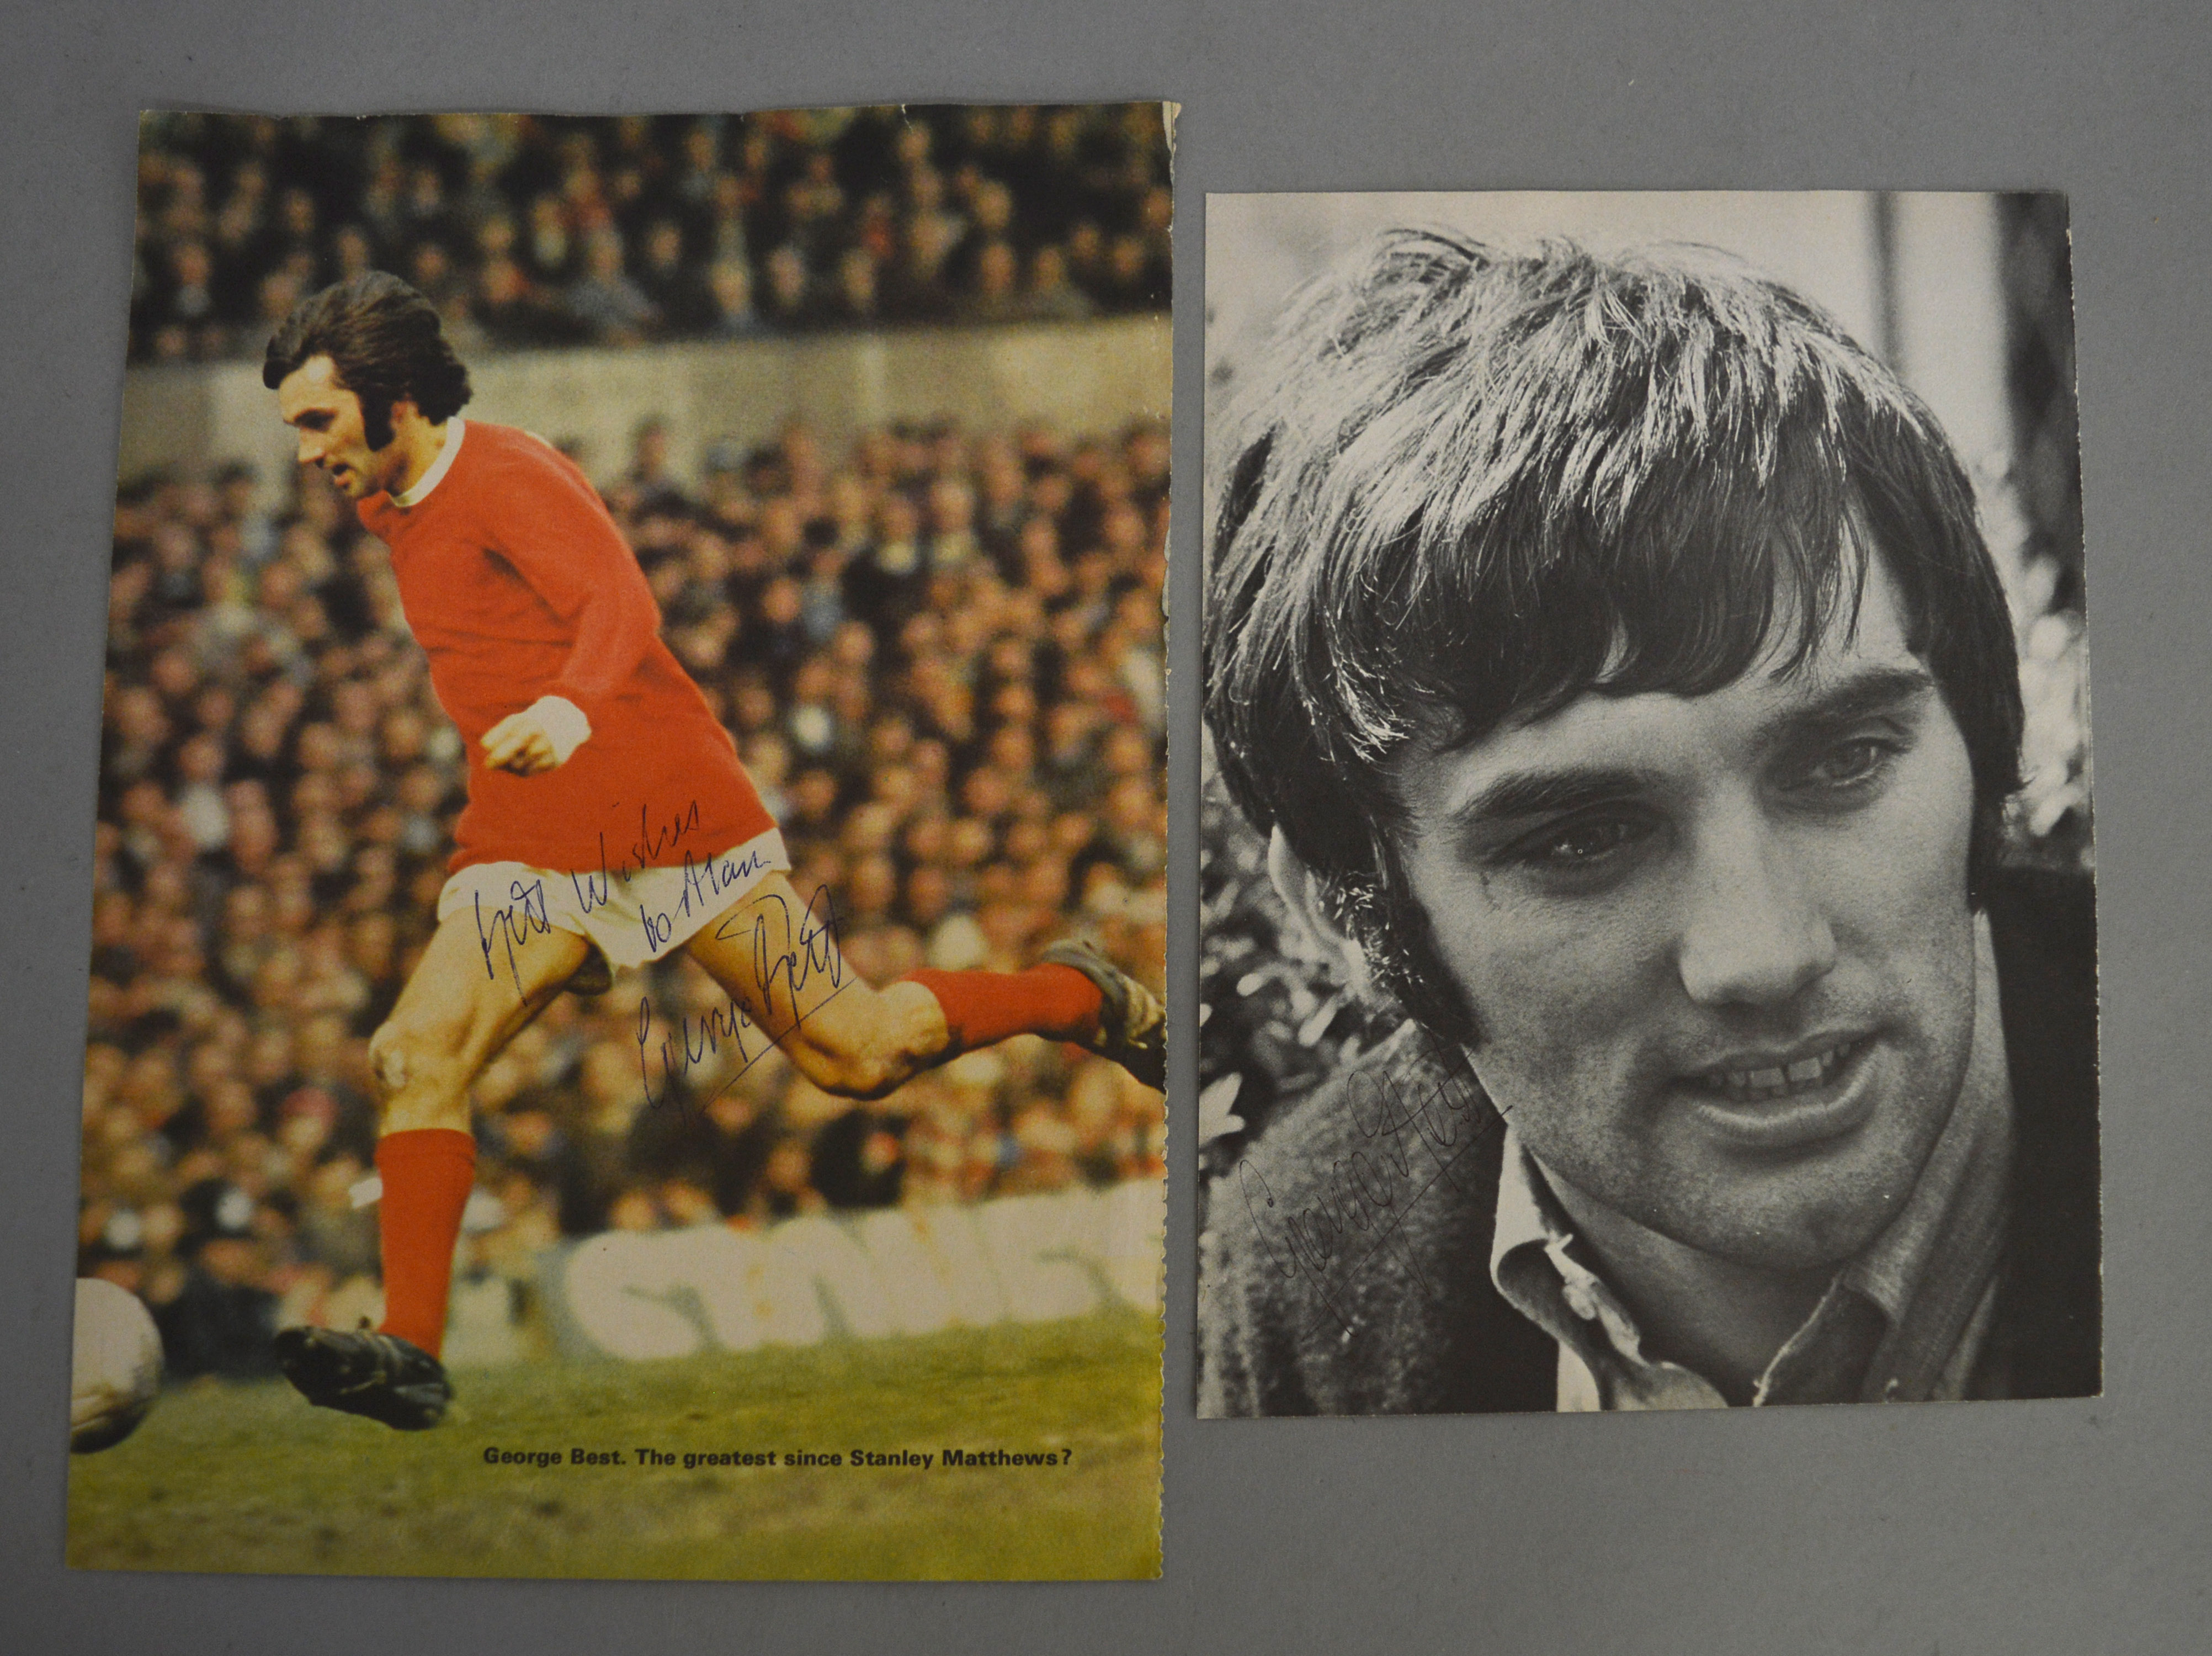 George Best signed page from an early football publication and another black & white signed page.